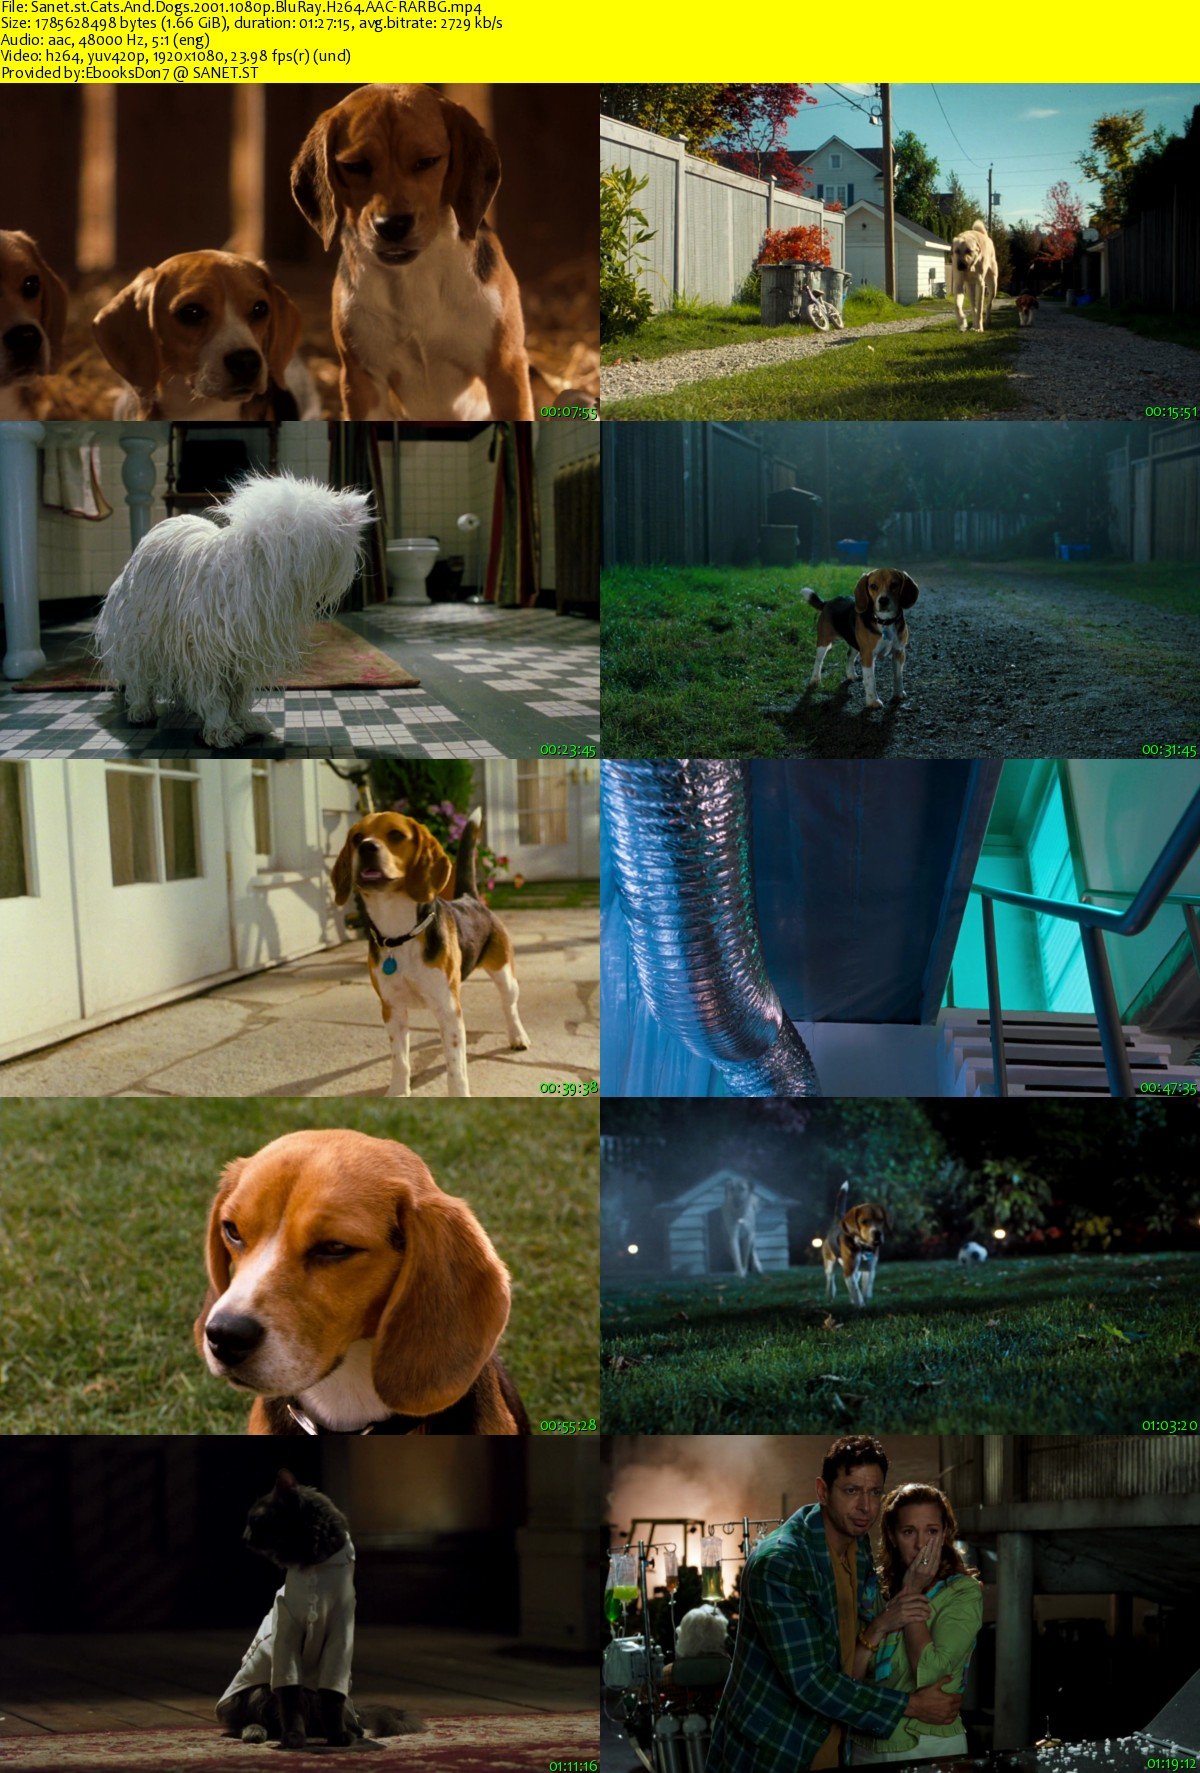 Cats And Dogs 2001 1080p BluRay H264 AACRARBG SoftArchive